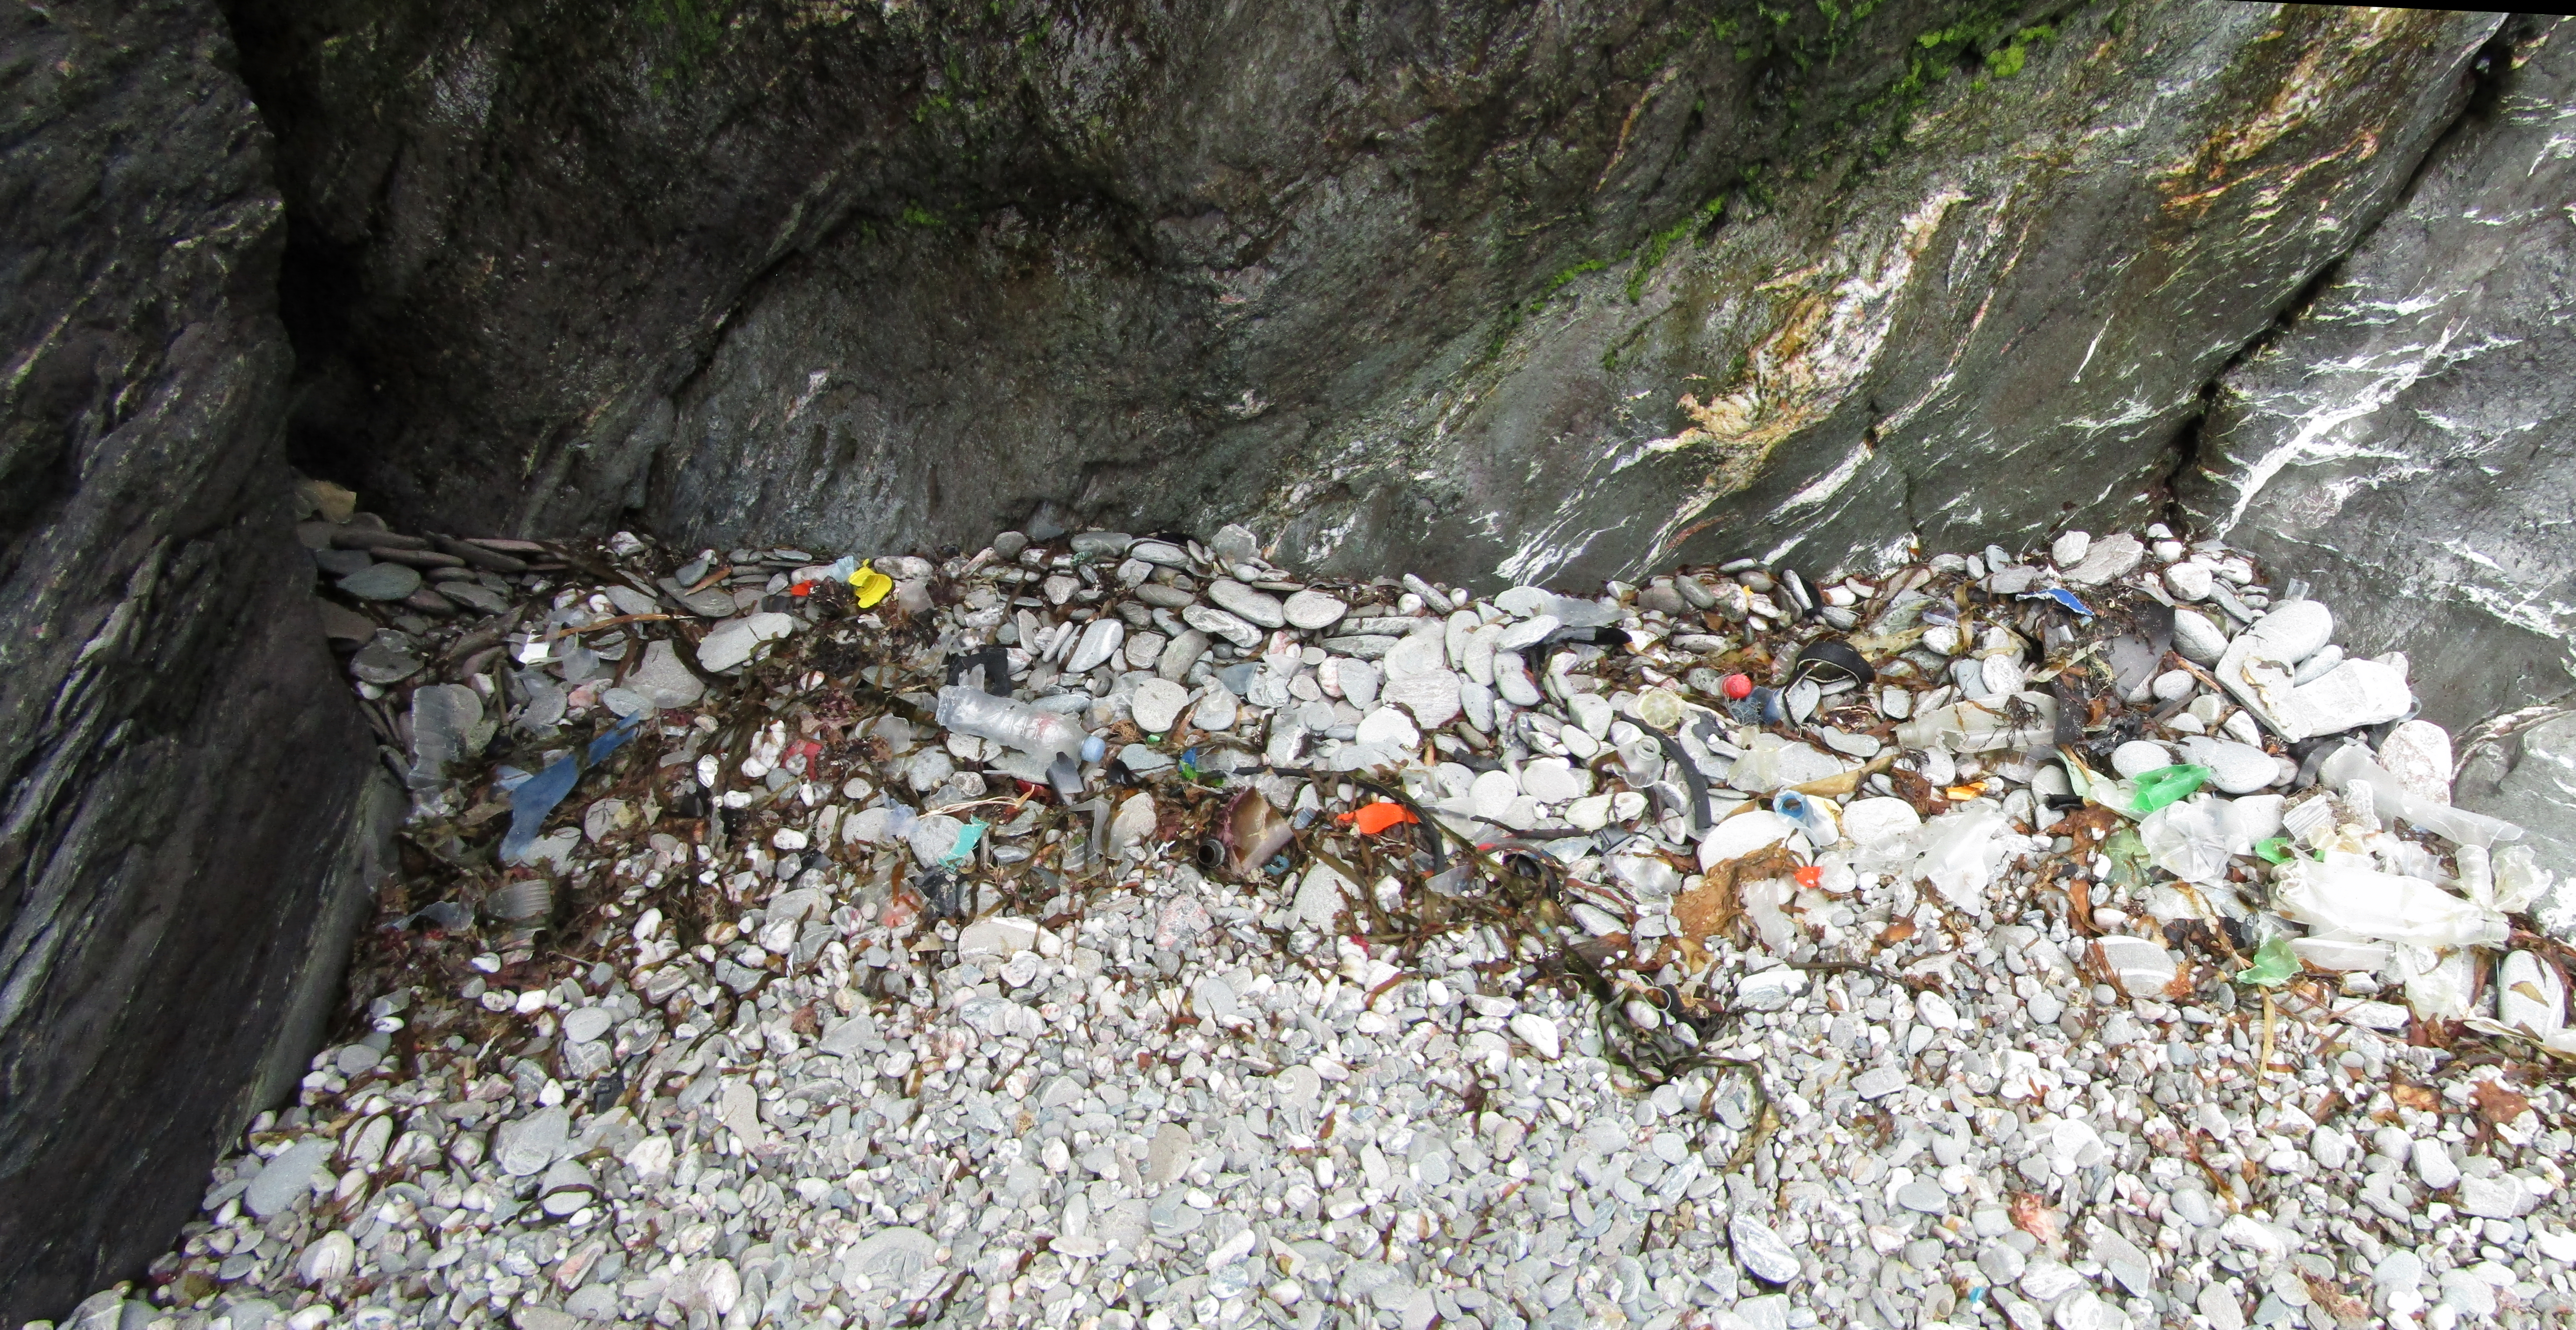 Some of the plastic litter washed up at Ivy Cove near Kingswear, on the south coast of Devon, England.